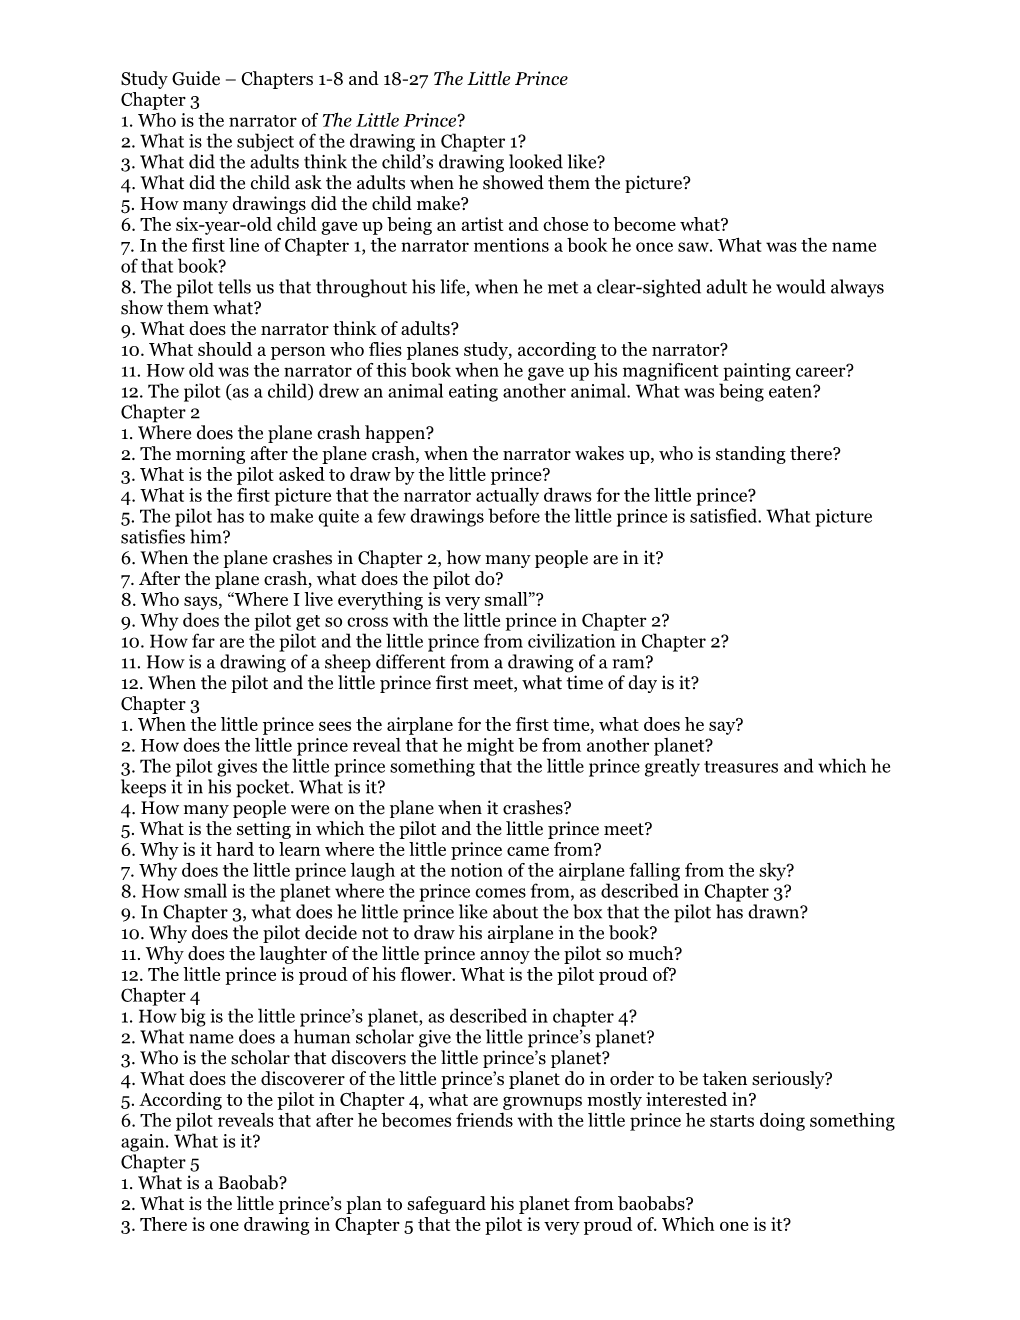 Study Guide Chapters 1-8 and 18-27 the Little Prince